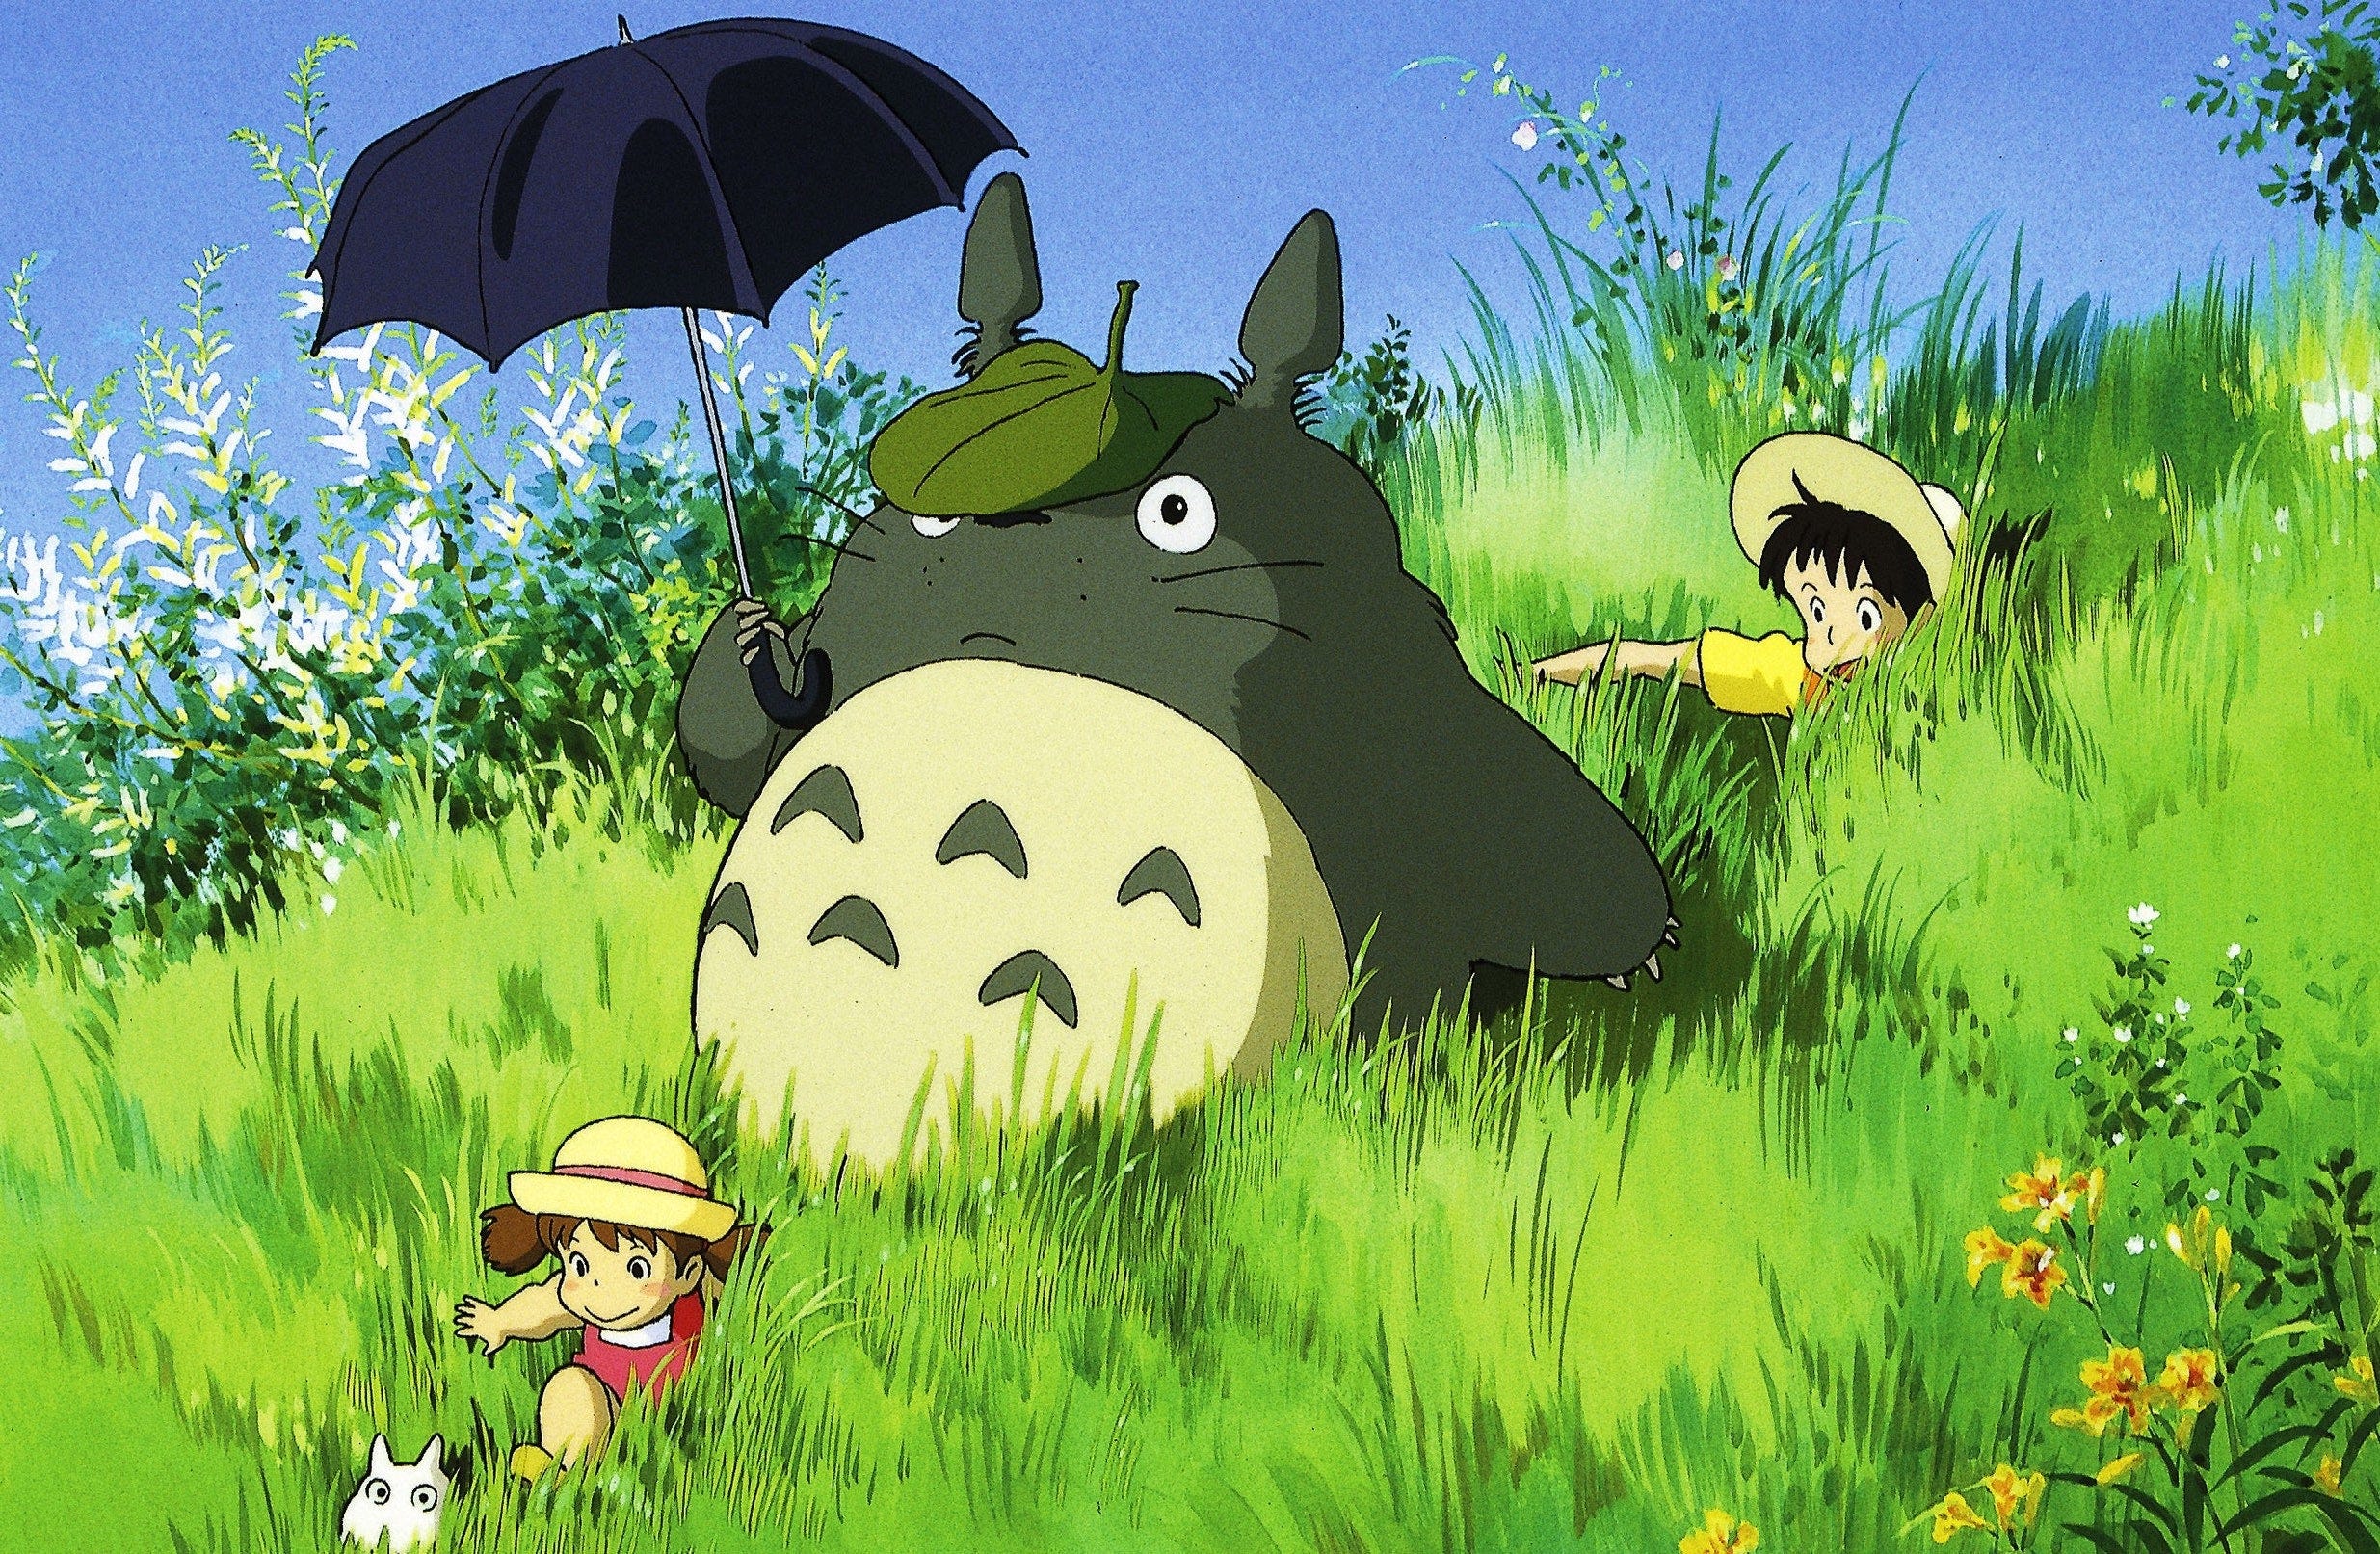 What to talk to your kids about after watching My Neighbor Totoro